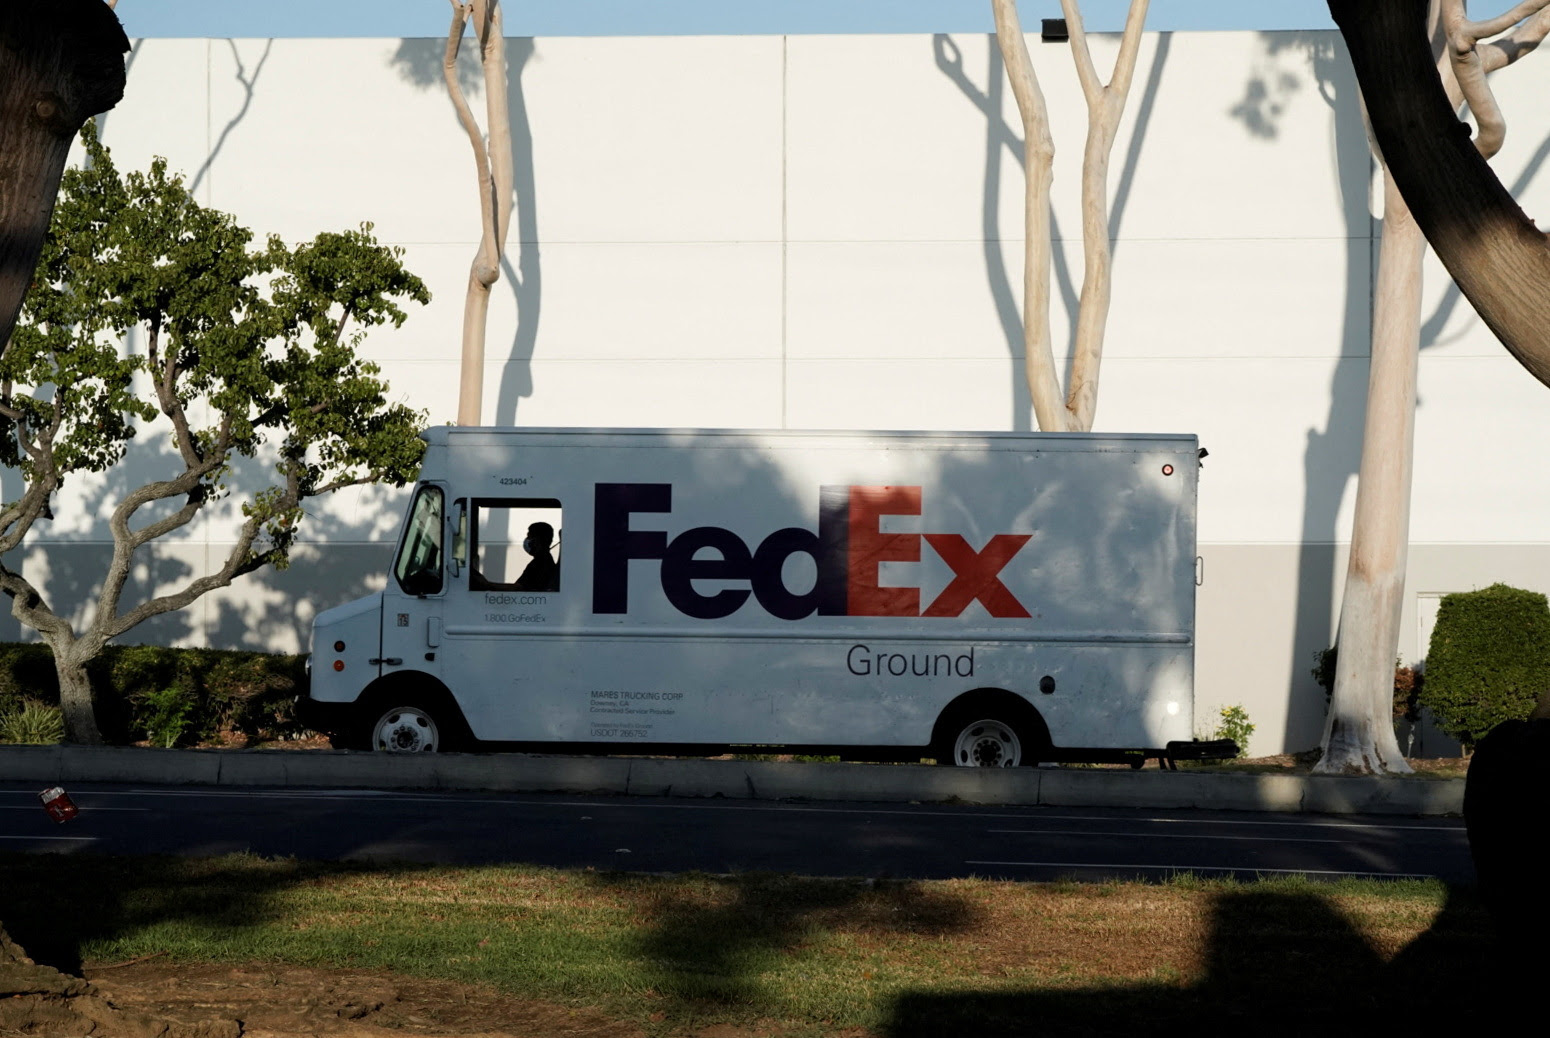 FedEx needs to deliver on cost-cut plan as investor patience wanes, analysts say